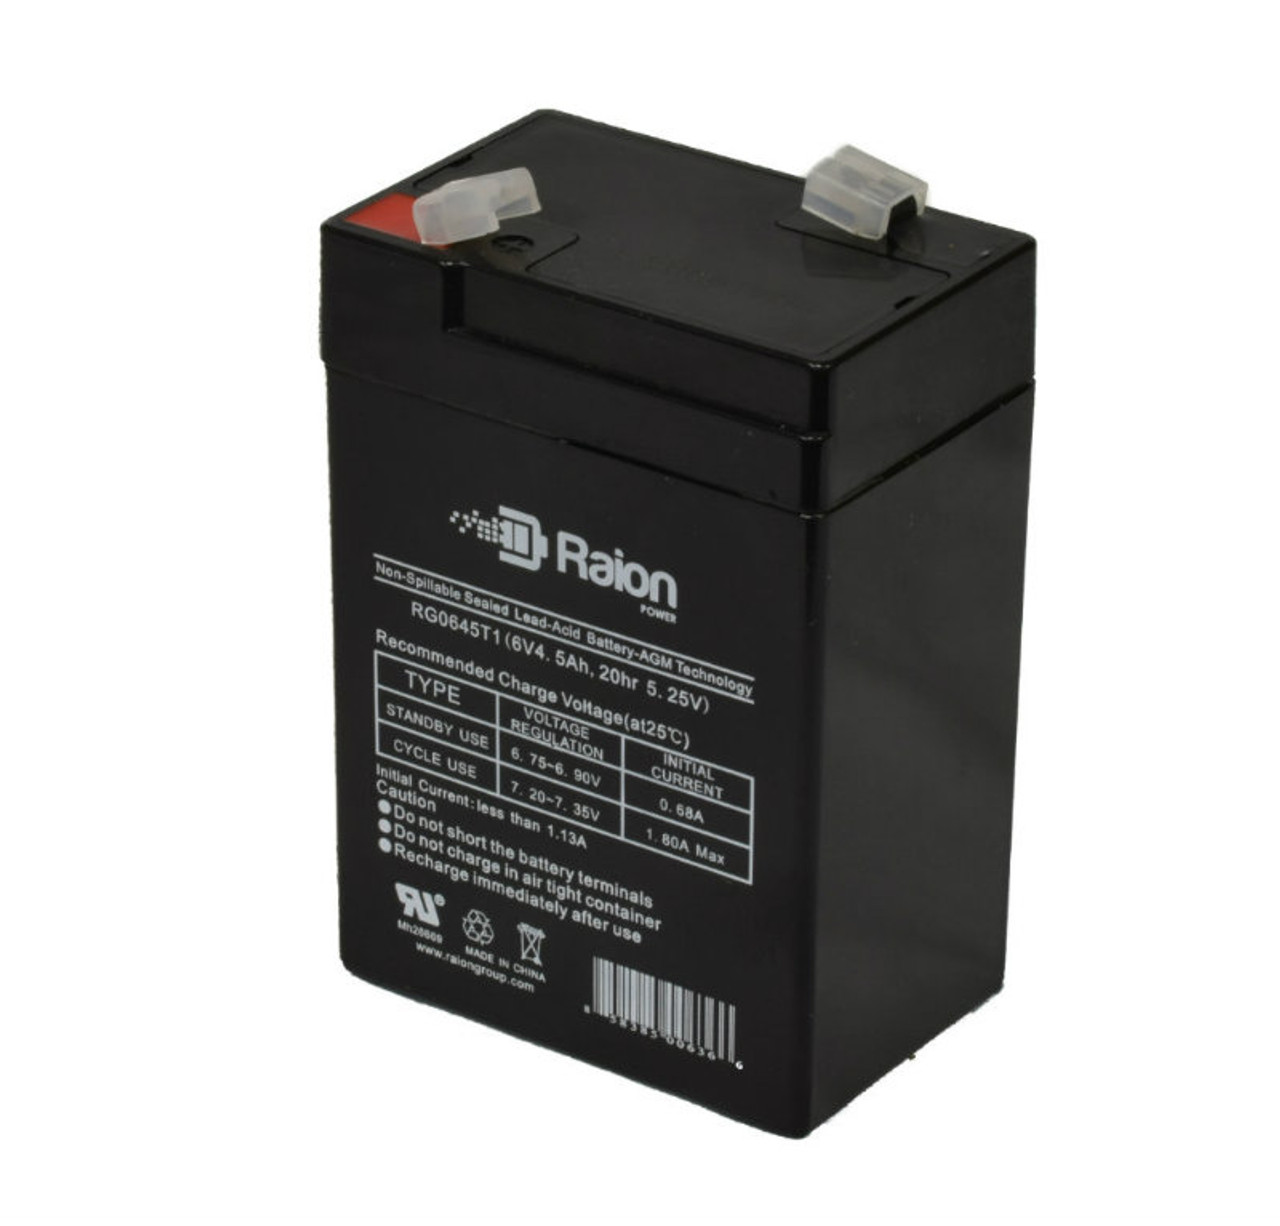 Raion Power RG0645T1 6V 4.5Ah Replacement Battery Cartridge for GFX NP4-6